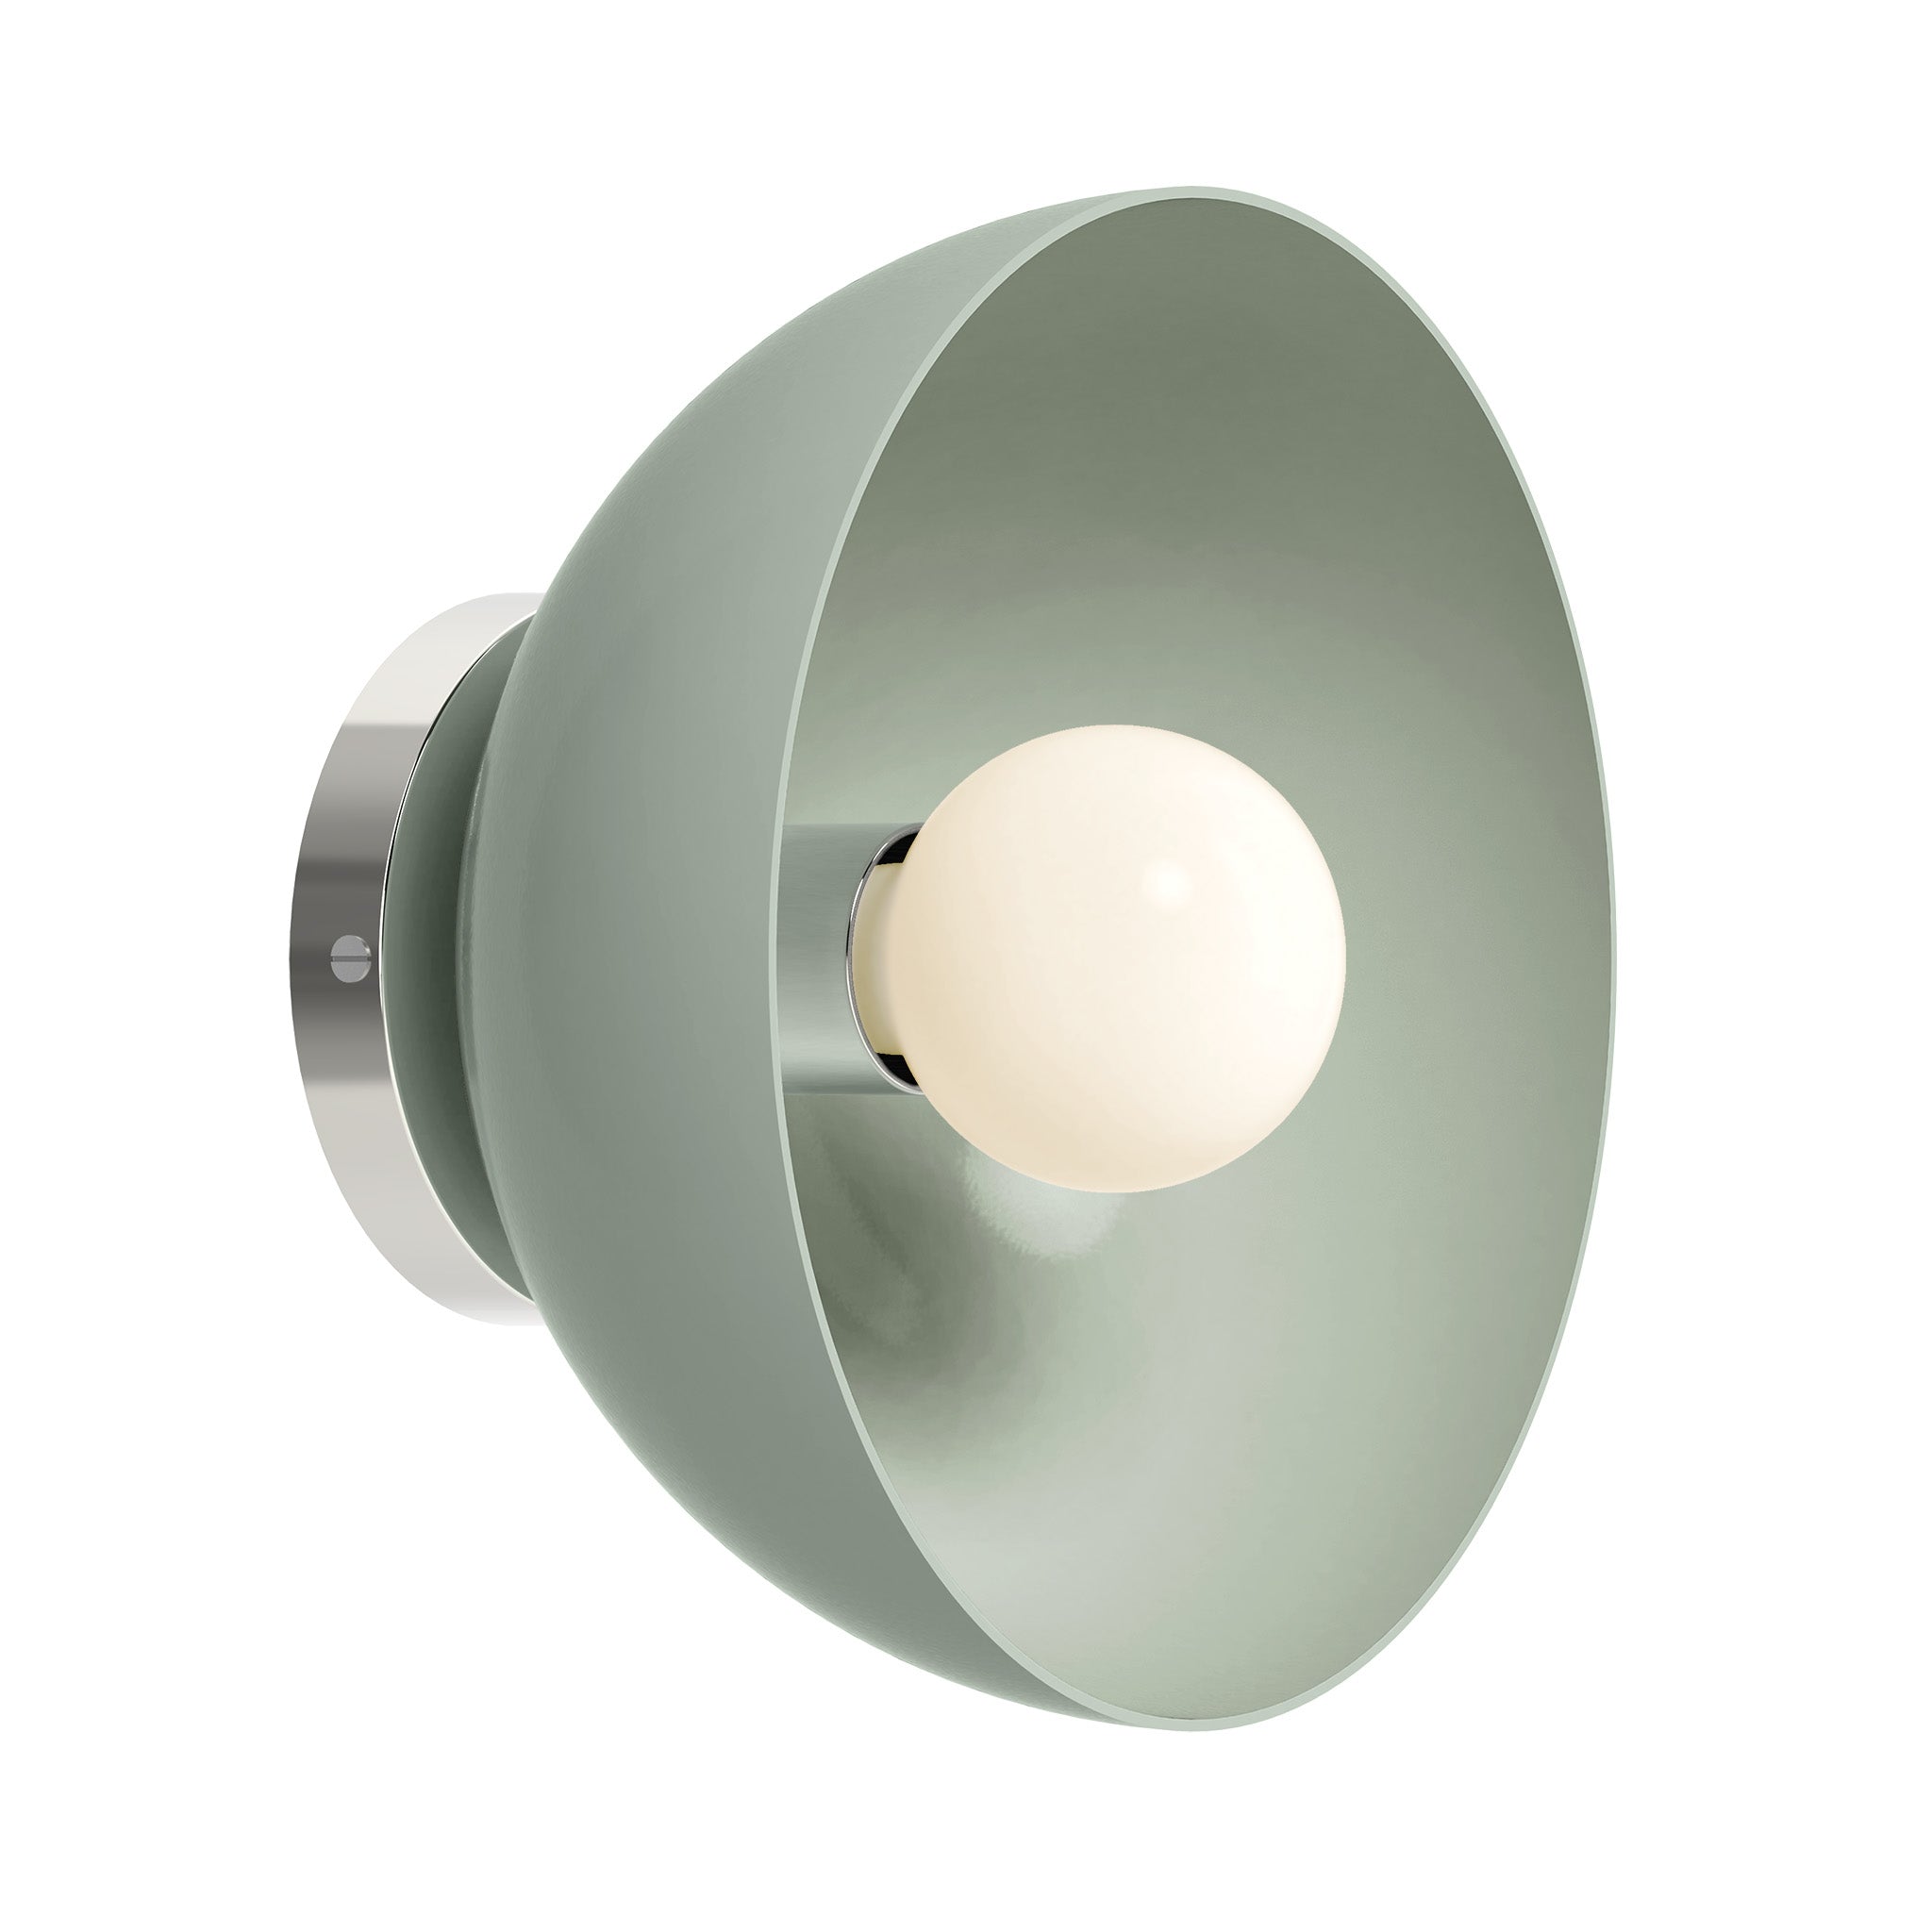 Nickel and bone color hemi dome sconce 10" Dutton Brown lighting